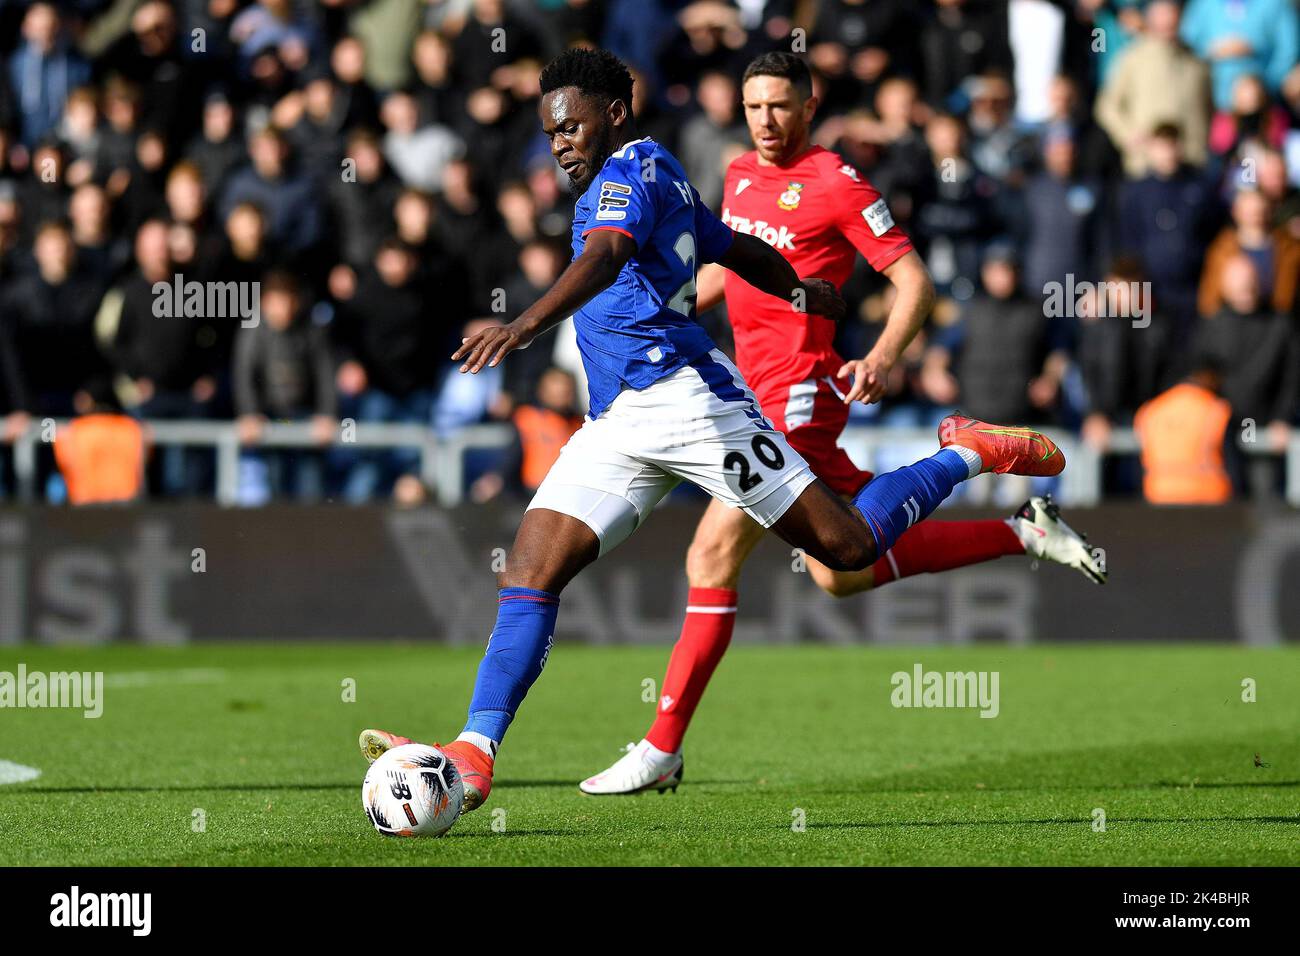 Oldham, UK. 1st October 2022during the Vanarama National League match between Oldham Athletic and Wrexham at Boundary Park, Oldham on Saturday 1st October 2022Mike Fondop-Talom of Oldham Athletic scores his side's first goal of the game during the Vanarama National League match between Oldham Athletic and Wrexham at Boundary Park, Oldham on Saturday 1st October 2022during the Vanarama National League match between Oldham Athletic and Wrexham at Boundary Park, Oldham on Saturday 1st October 2022. Credit: MI News & Sport /Alamy Live News Stock Photo